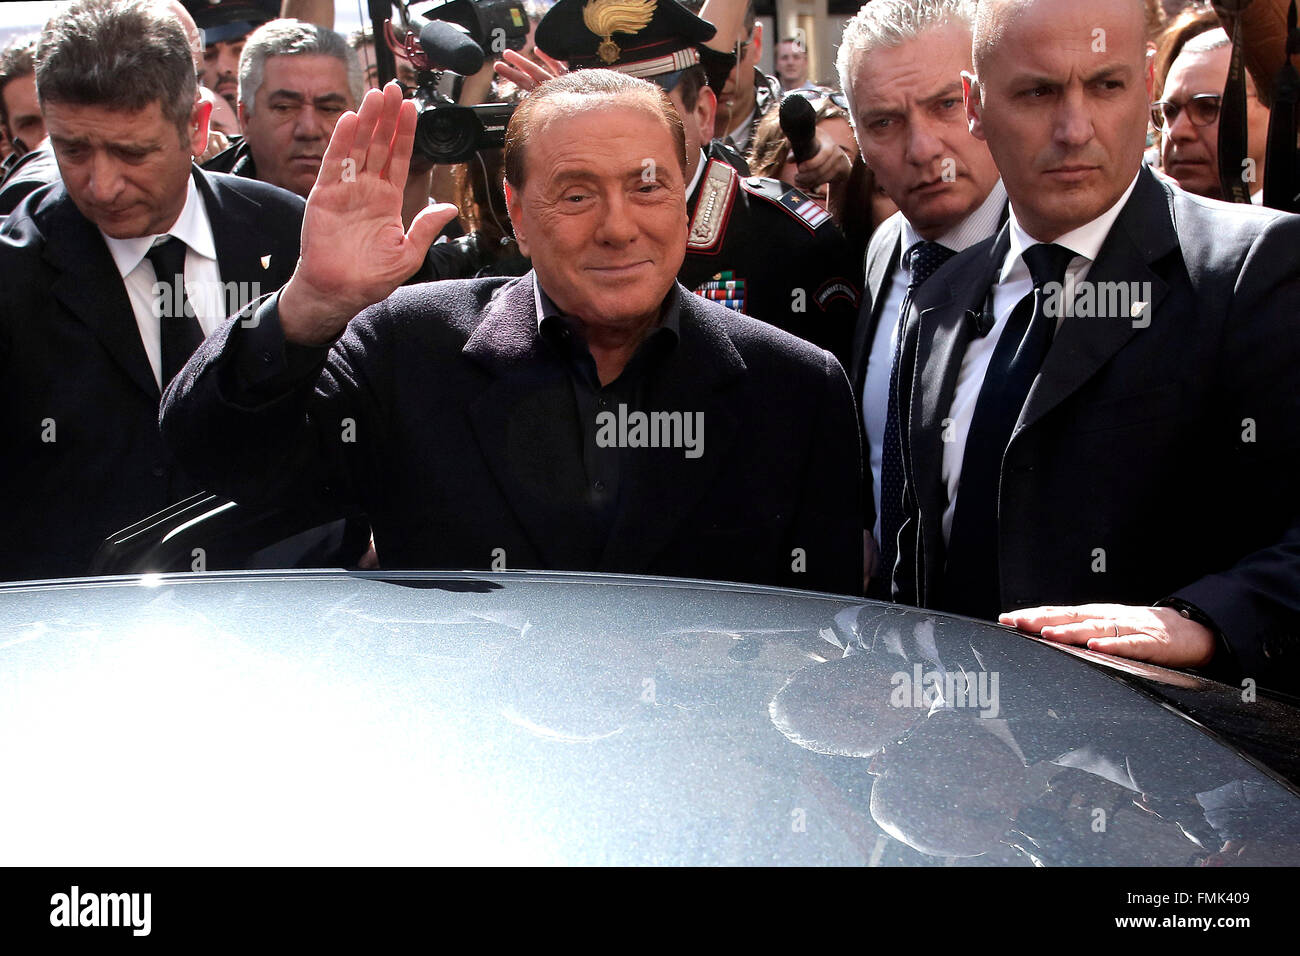 Rome, Italy. 12th Mar, 2016. Silvio Berlusconi waves at people Rome 12th March 2016 Gazebo at Largo Goldoni. Primary elections of the Centre-right party for the local elections of the Mayor of Rome. Photo Samantha Zucchi © Insidefoto/Alamy Live News Credit:  Insidefoto/Alamy Live News Stock Photo